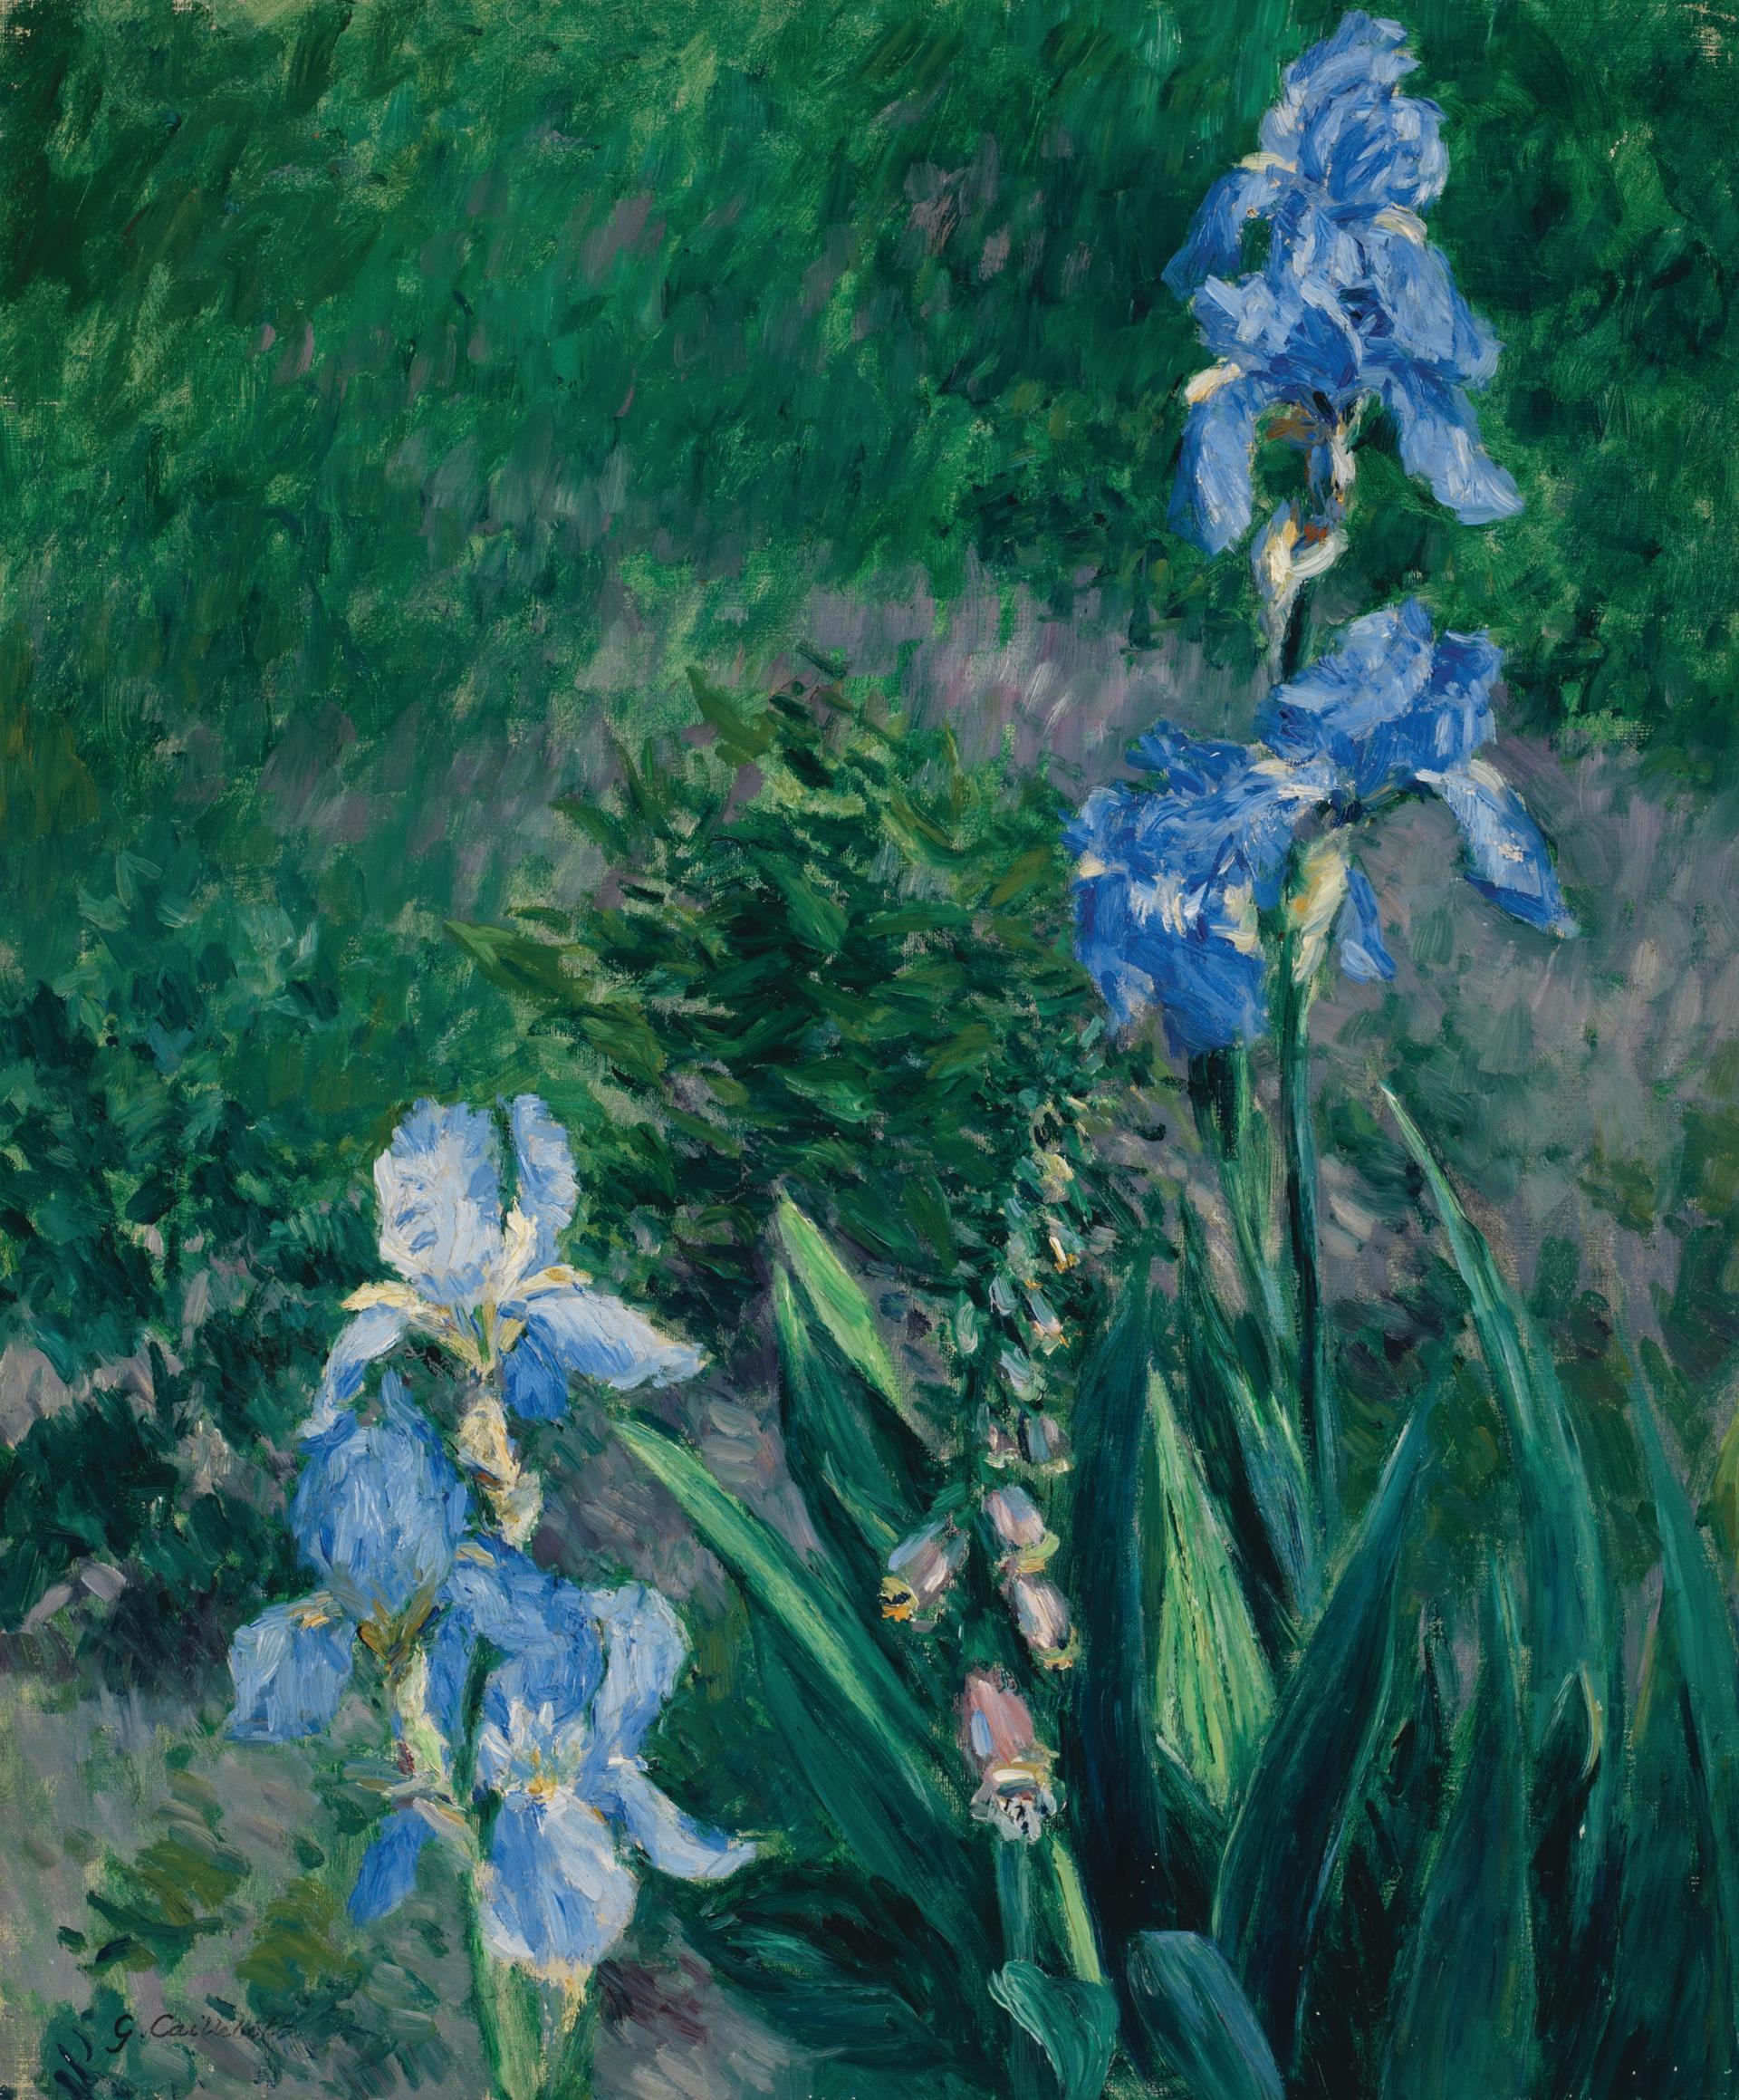 Caillebotte's Iris Bleus sold at Heffel auction house to a London dealer in 2016 but was denied an export licence Courtesy of Heffel Fine Art Auction House